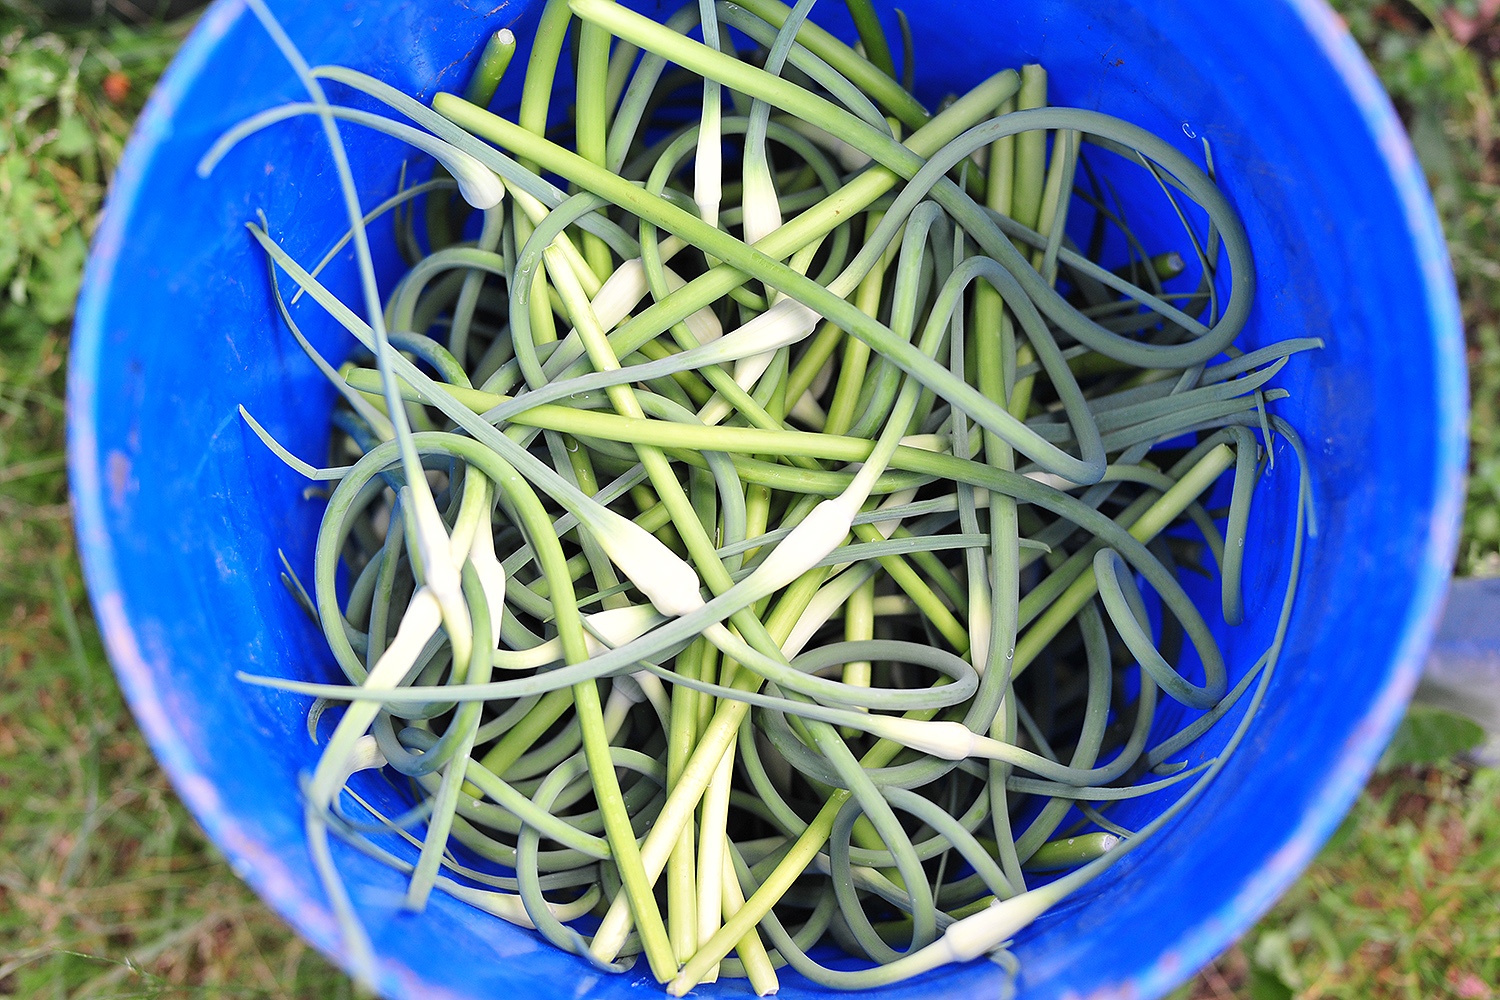 Garlic scapes are removed in June to encourage the bulbs to thicken. Scapes are the flower bud of the garlic plant and provide a mild garlic and onion flavor used for cooking.